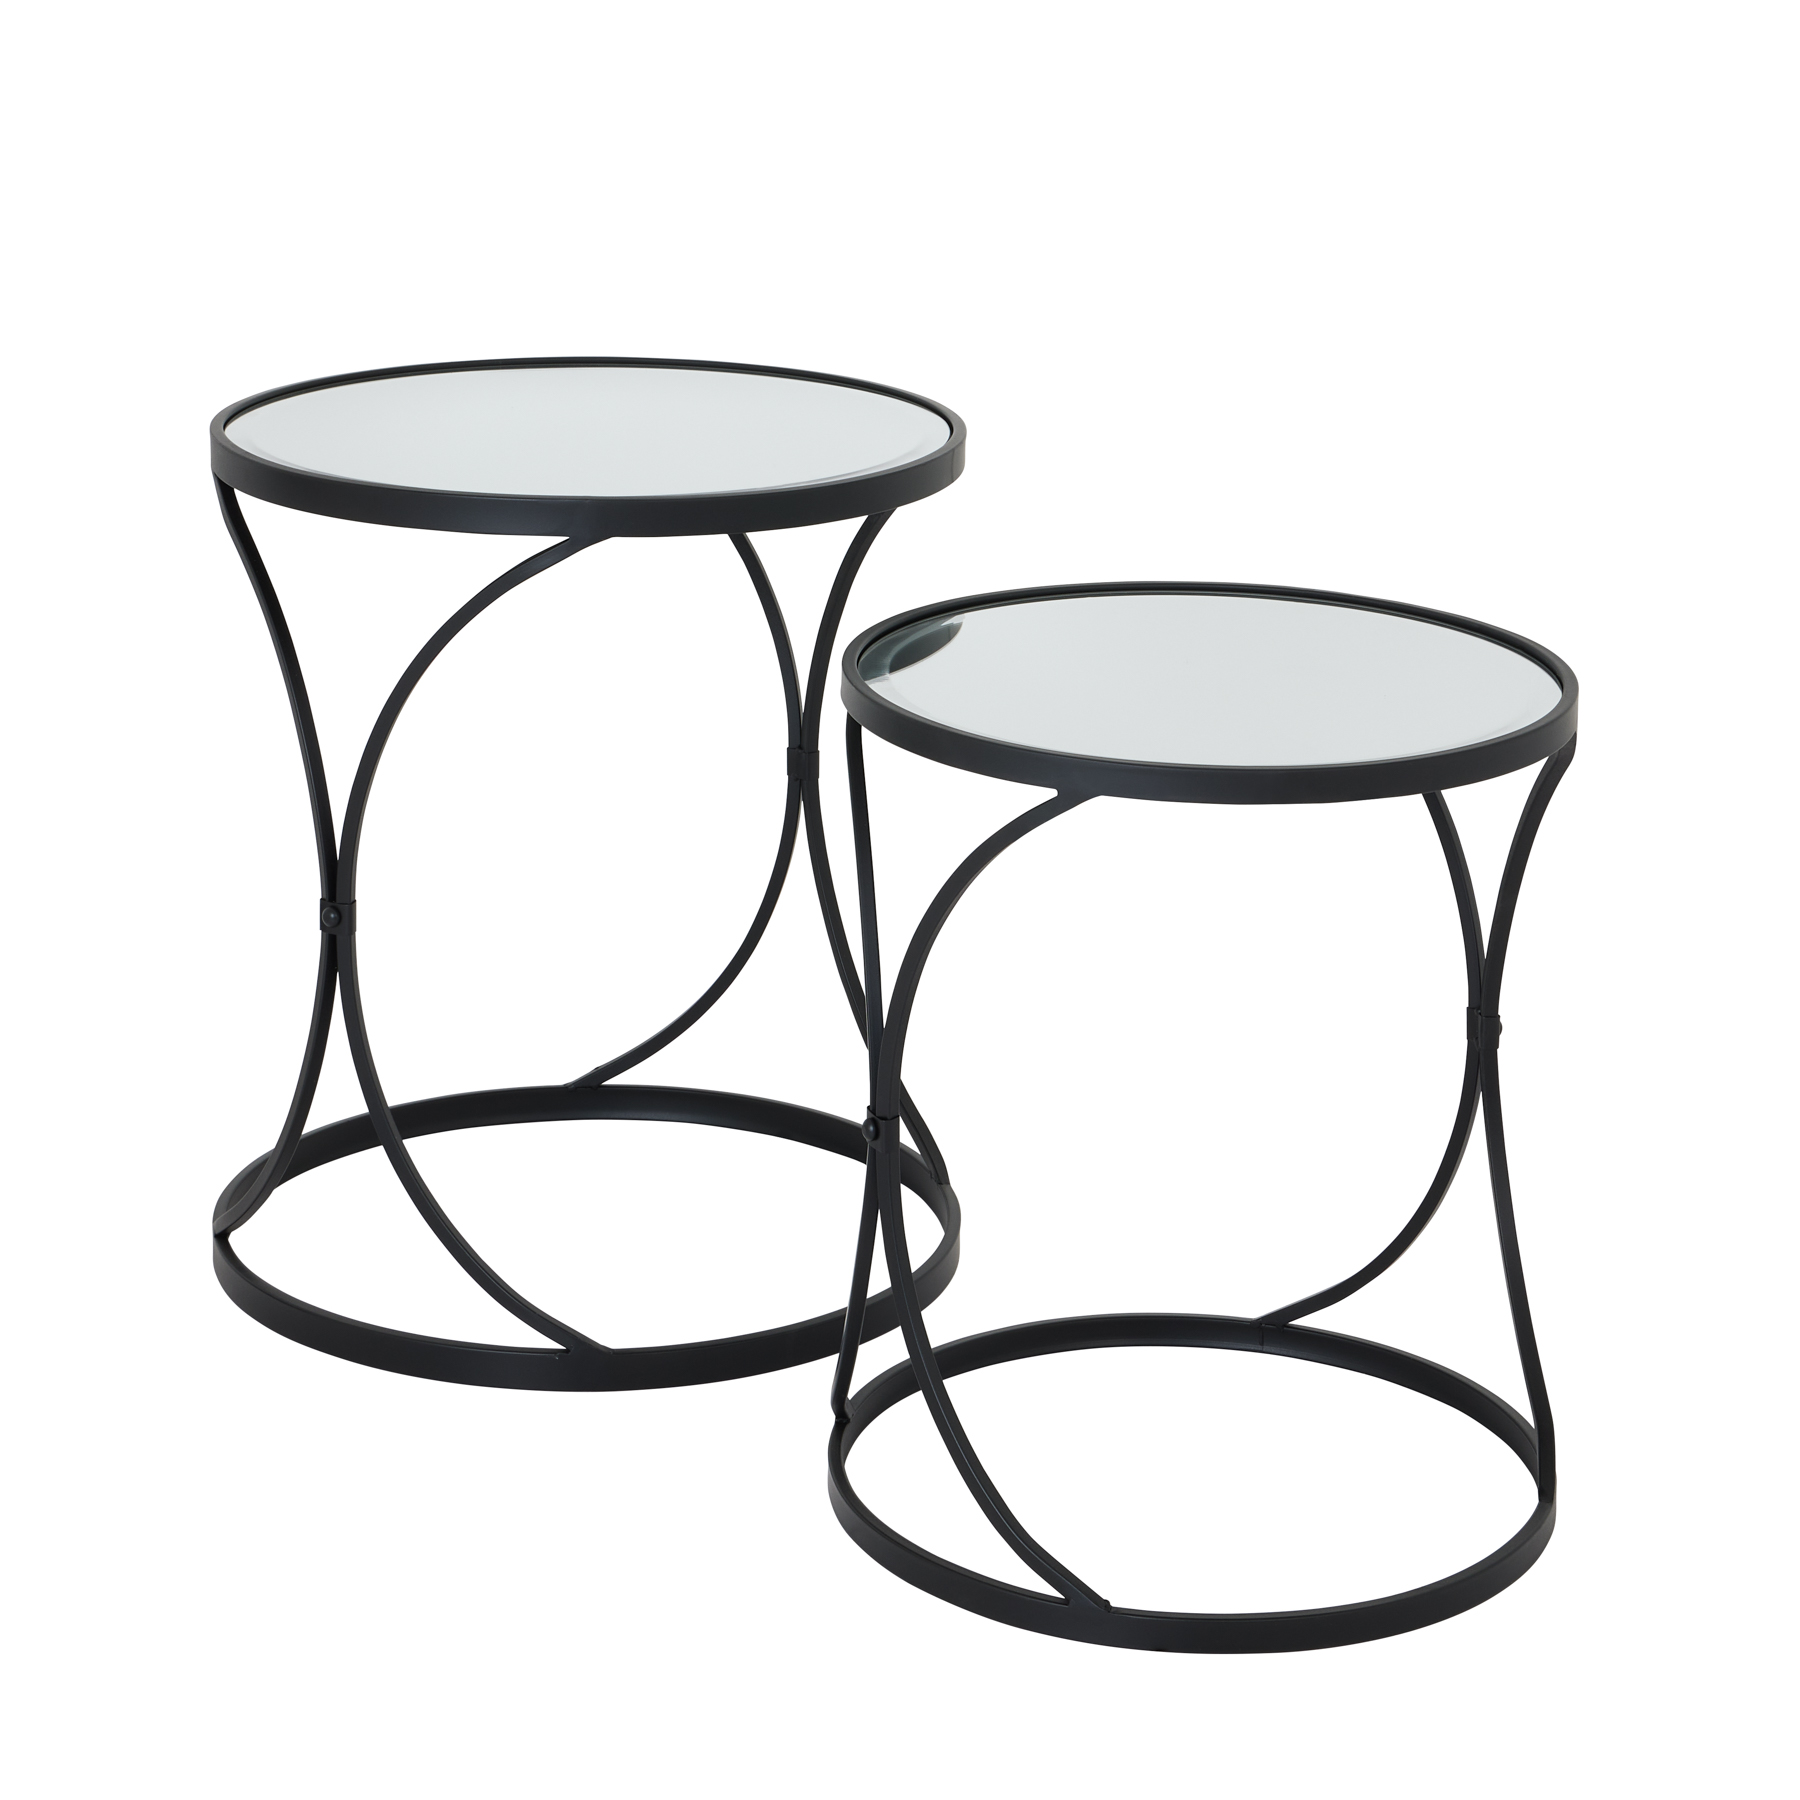 Concaved Set Of Two Black Mirrored Side Tables - Image 5